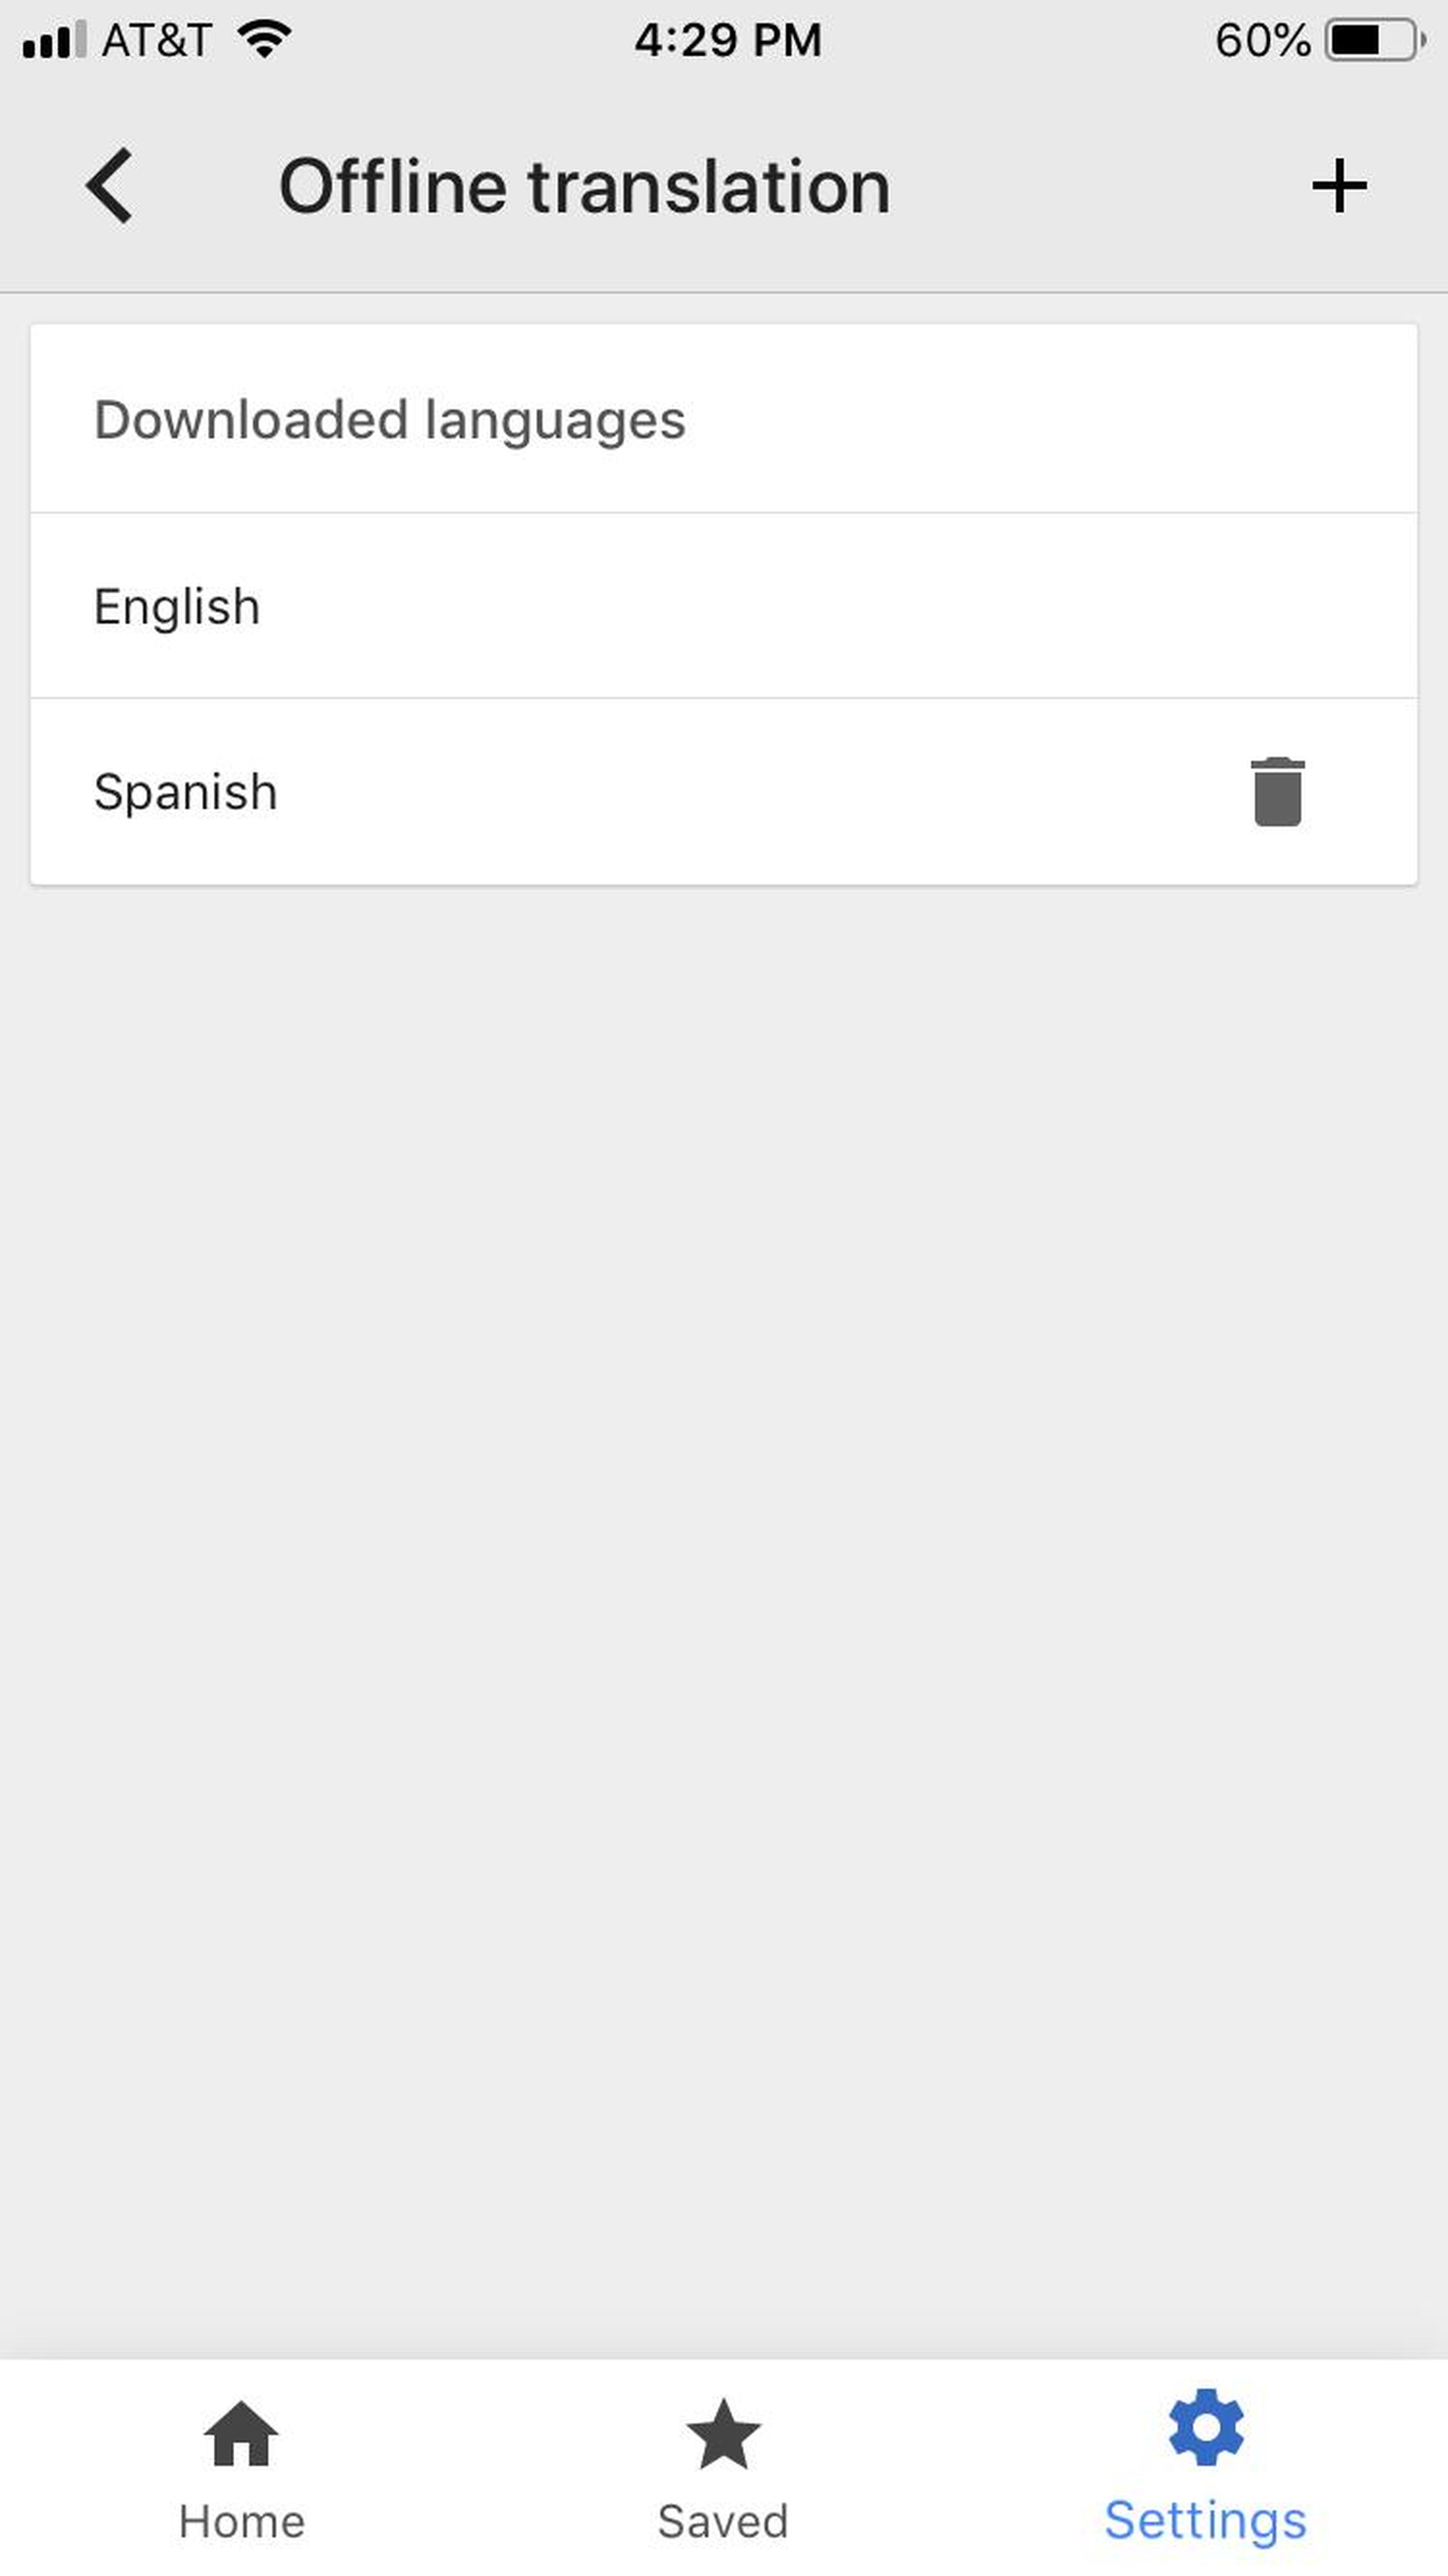 In Settings, find and delete your downloaded languages under "Offline translation."